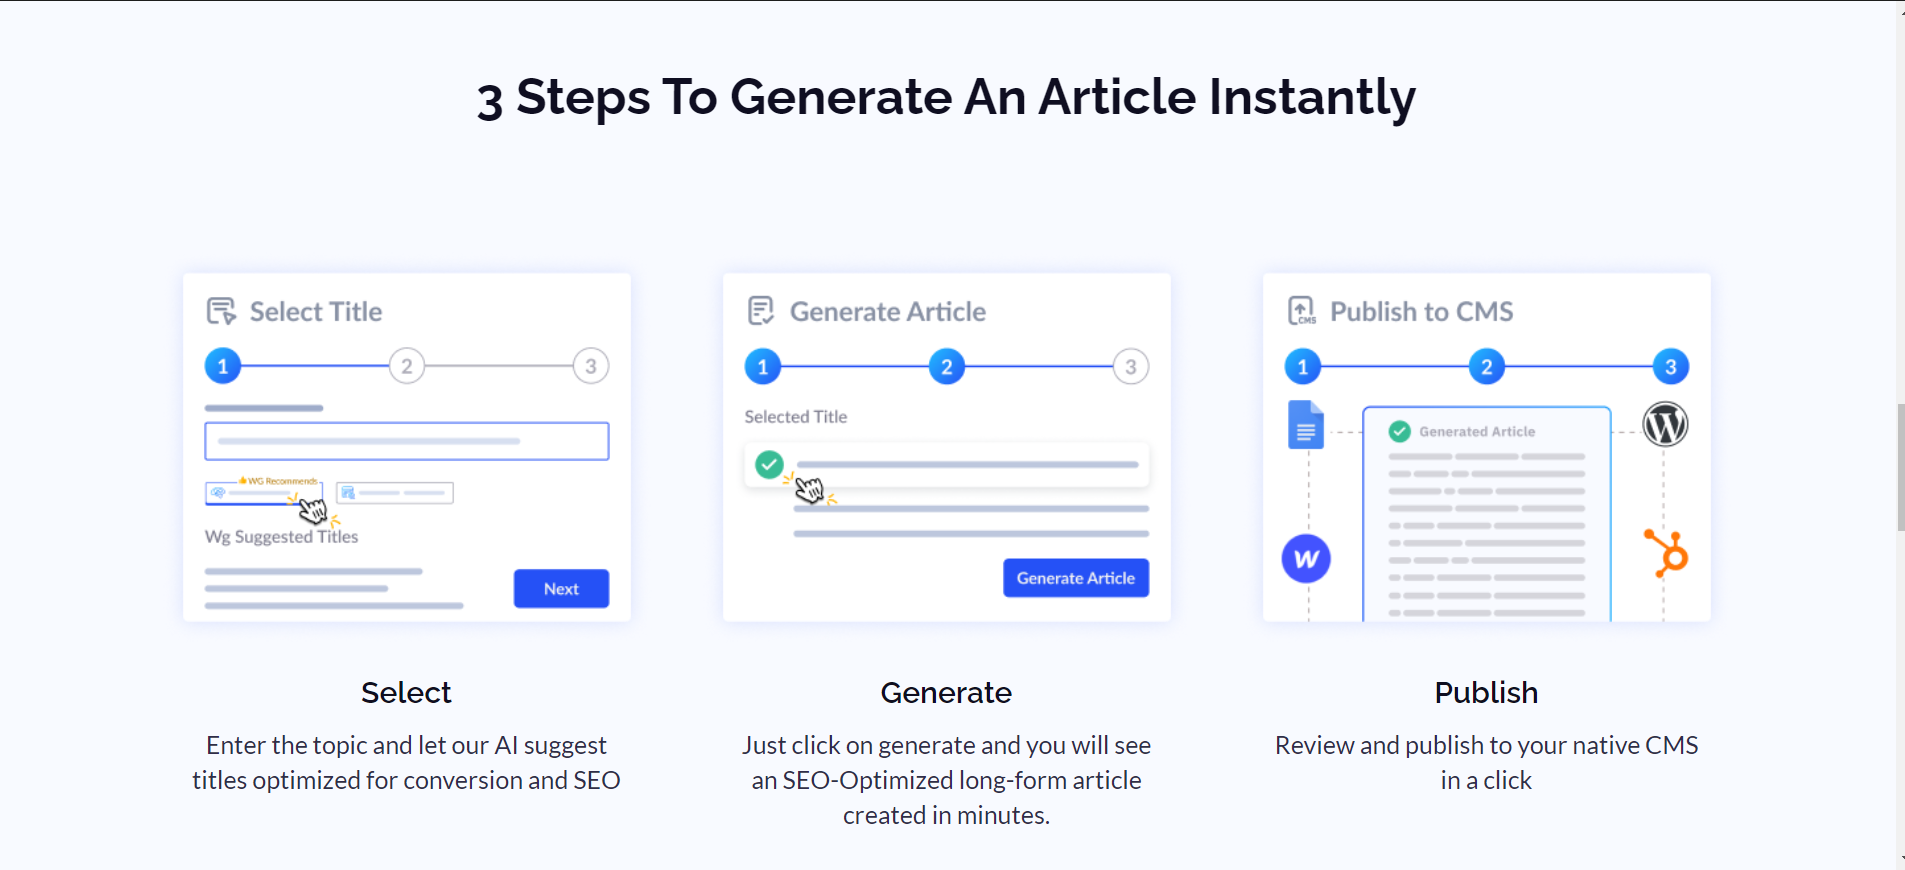 WriteGneius simplifies article generation and publishing. Our three-step process produces search engine ready articles with minimal editing and top-quality output. Our platform provides the best structure and customized elements to enhance your content